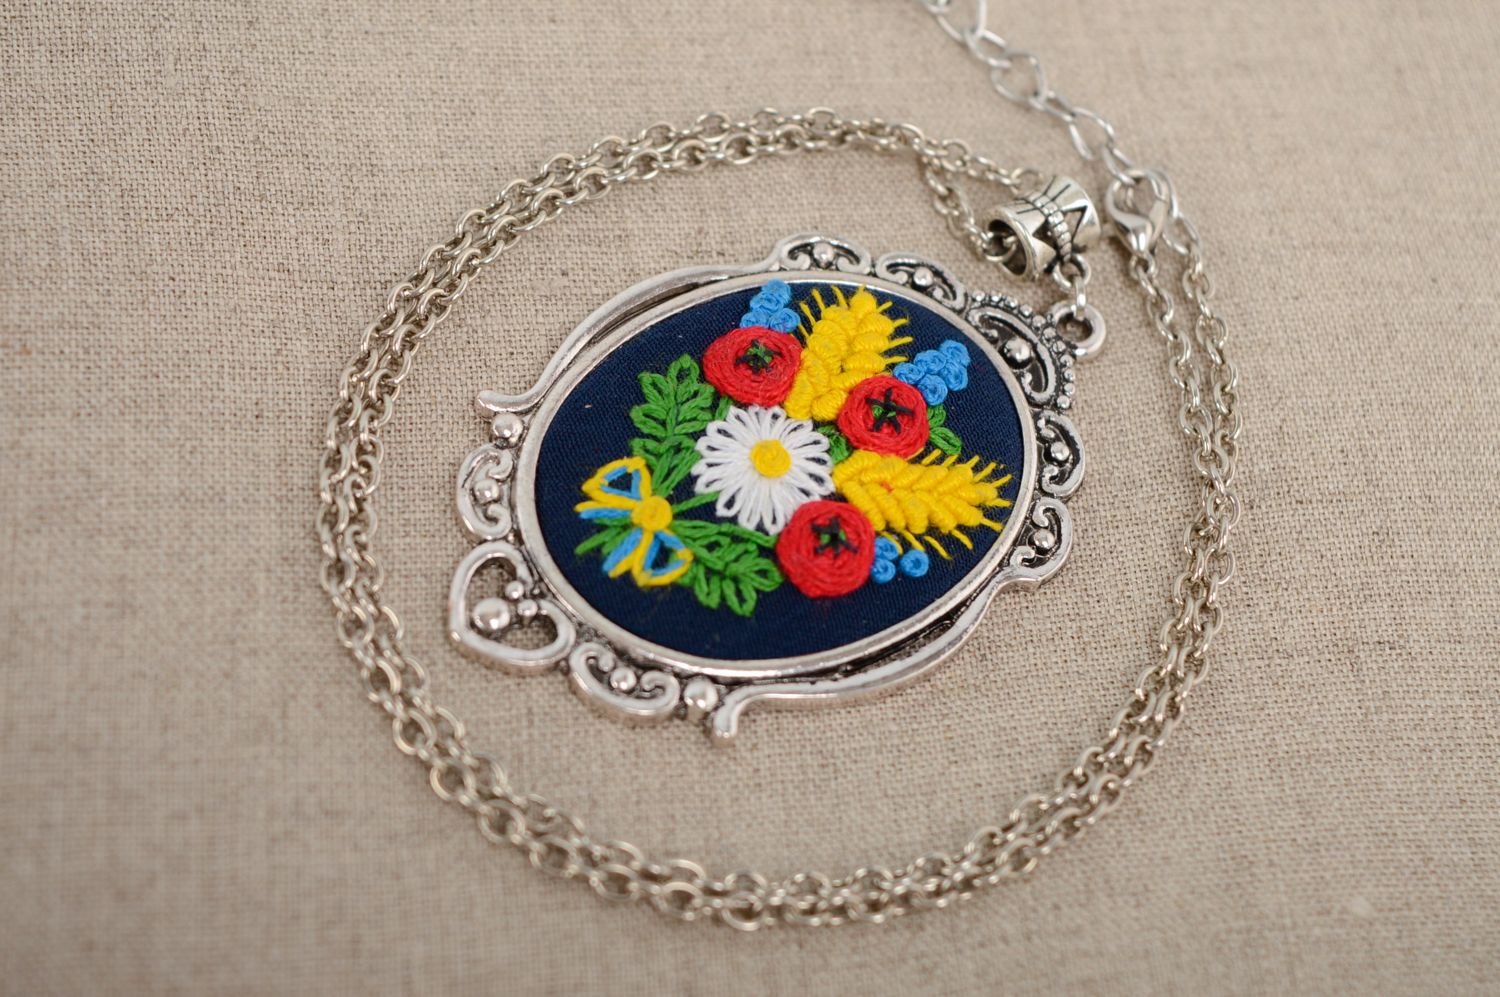 Pendant with French knot embroidery on long chain photo 1